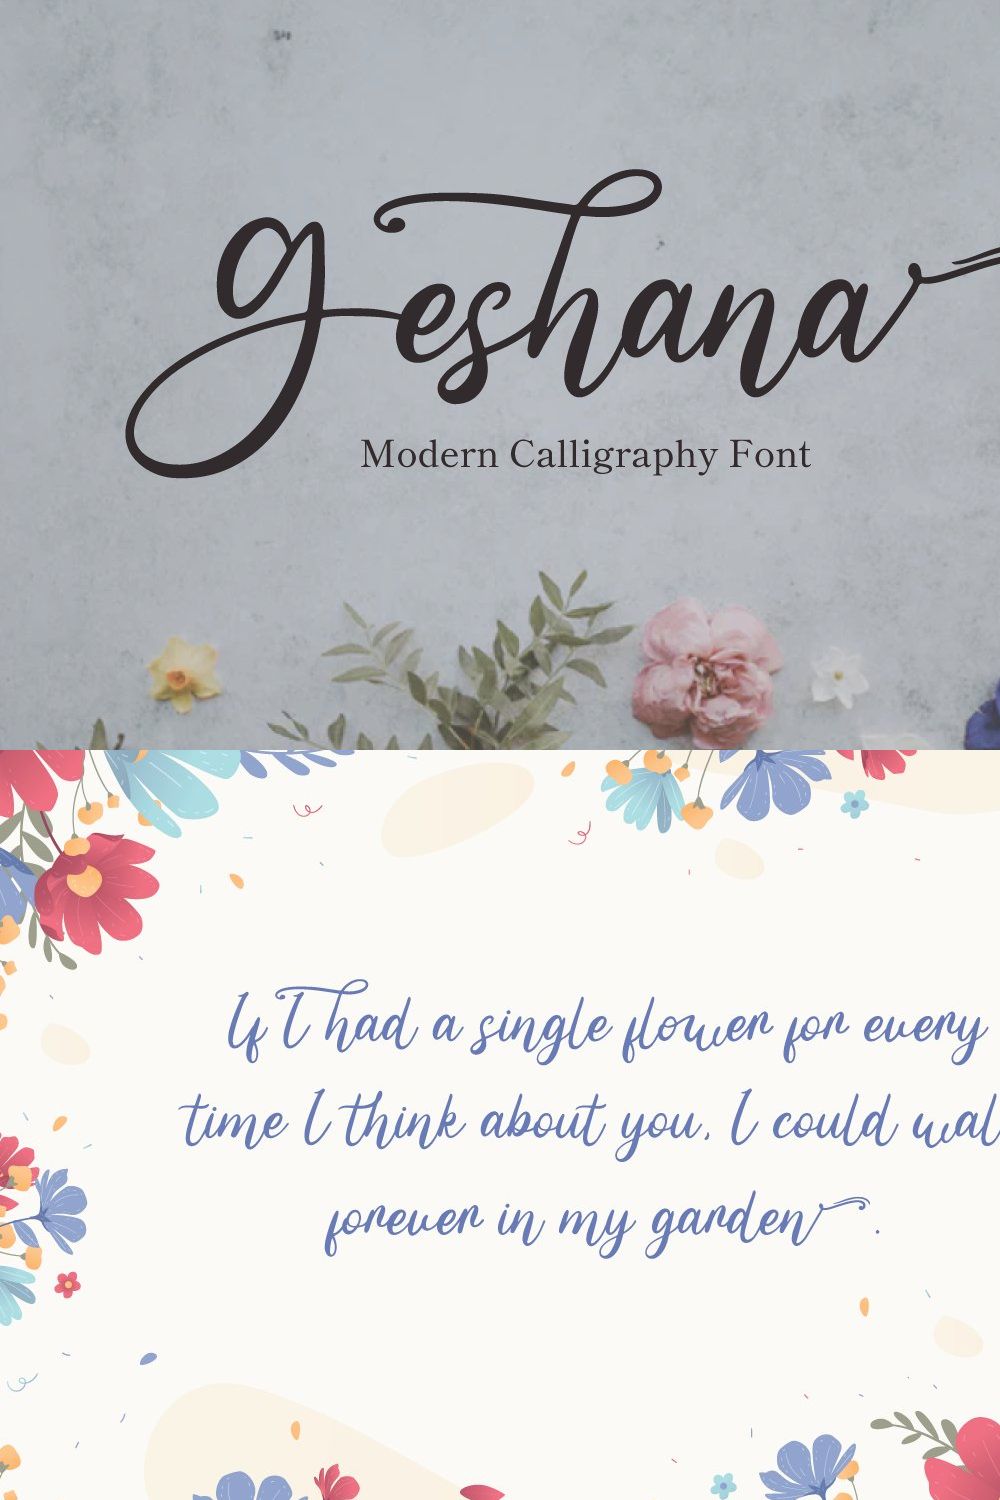 Geshana - Calligraphy Font pinterest preview image.